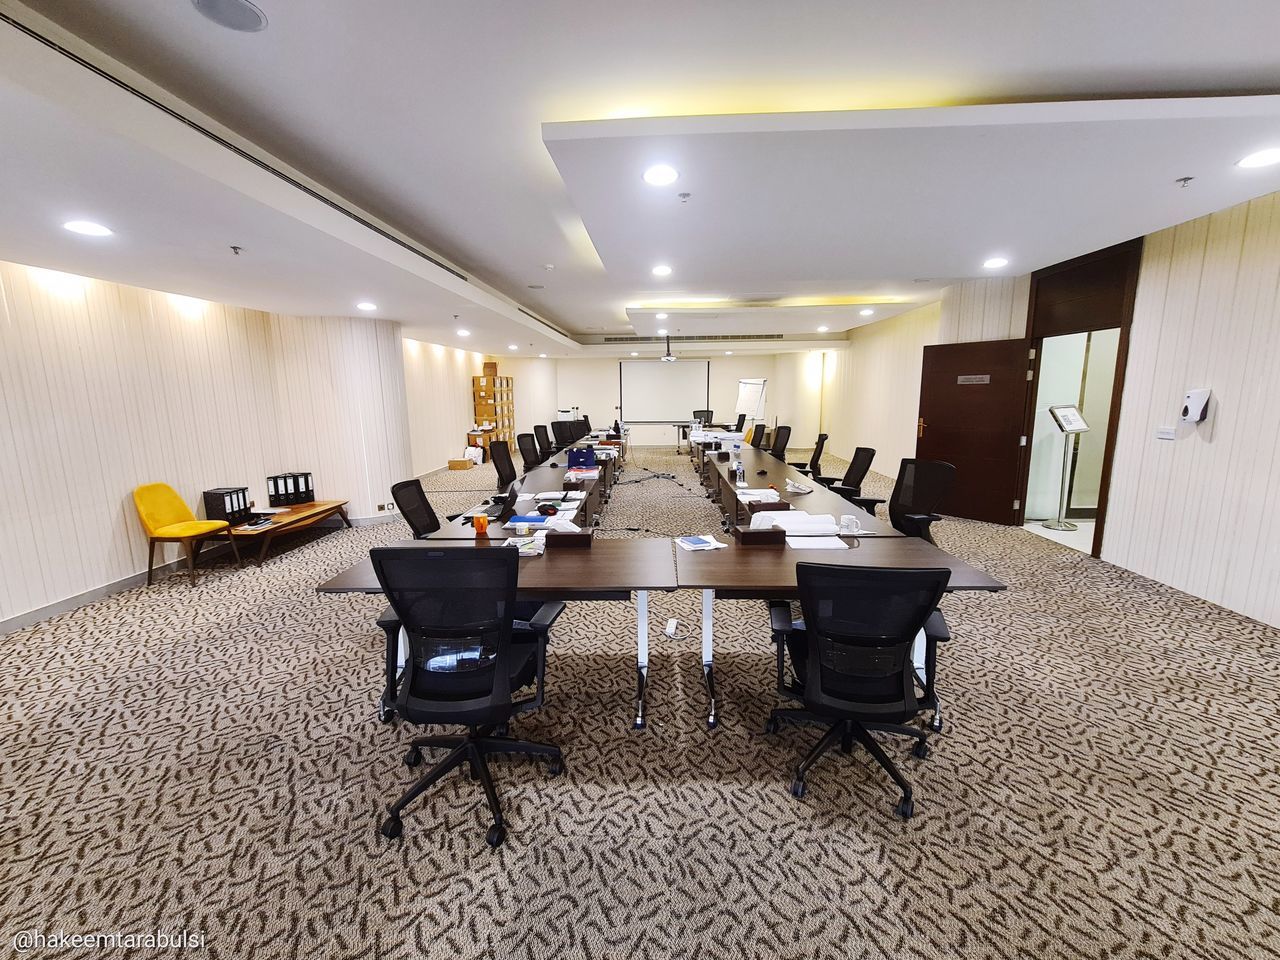 conference hall, seat, chair, indoors, room, table, architecture, business, interior design, furniture, office, building, lobby, built structure, home interior, carpet, luxury, lighting equipment, no people, wealth, floor, office chair, ceiling, domestic room